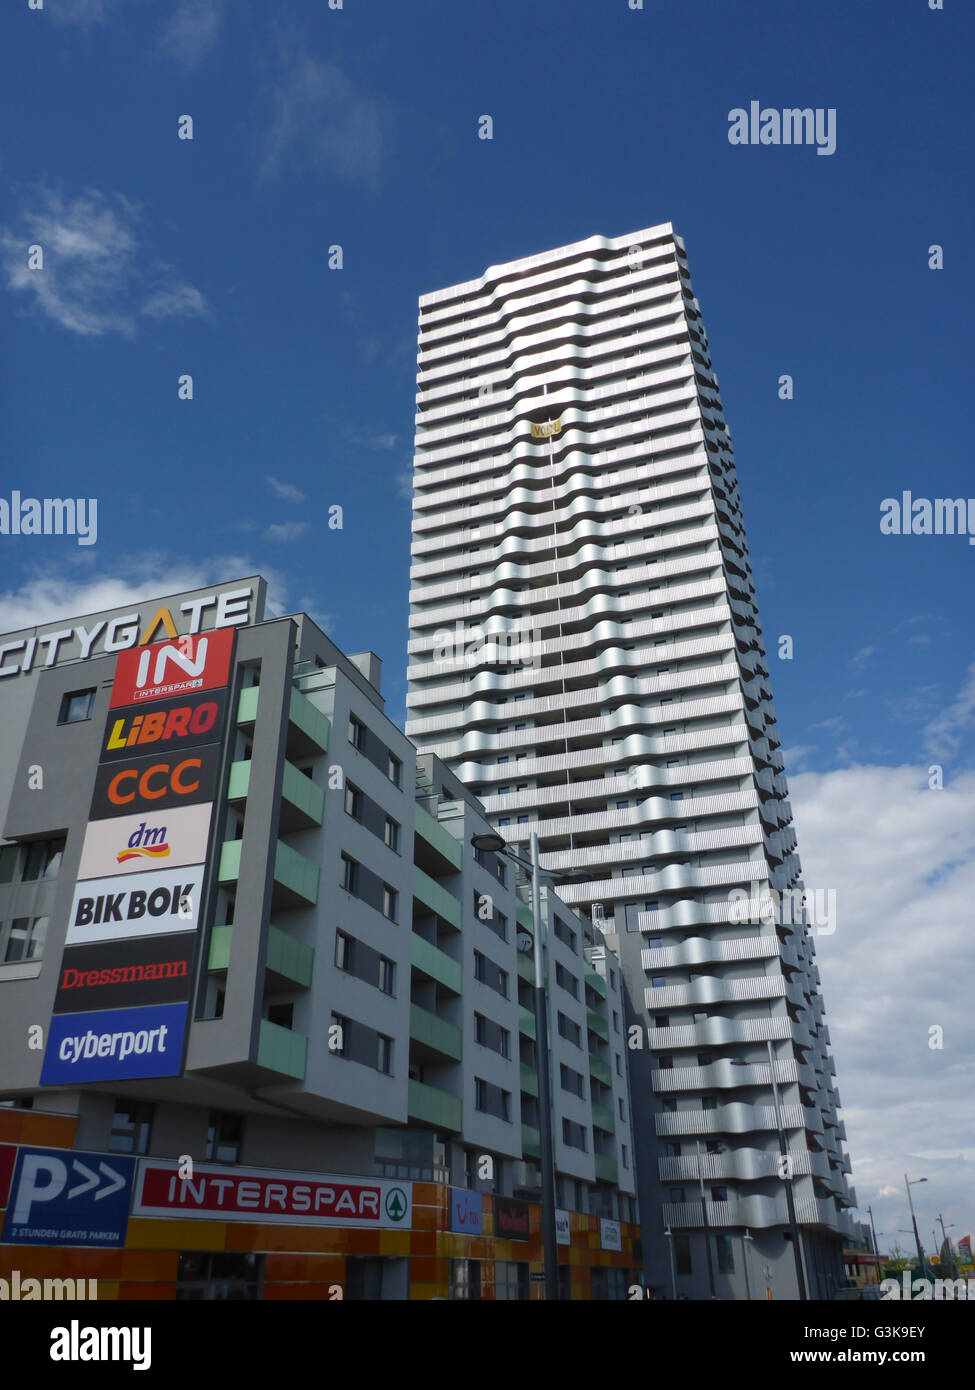 City Gate apartment houses and shopping center, Austria, Wien, 21., Wien, Vienna Stock Photo